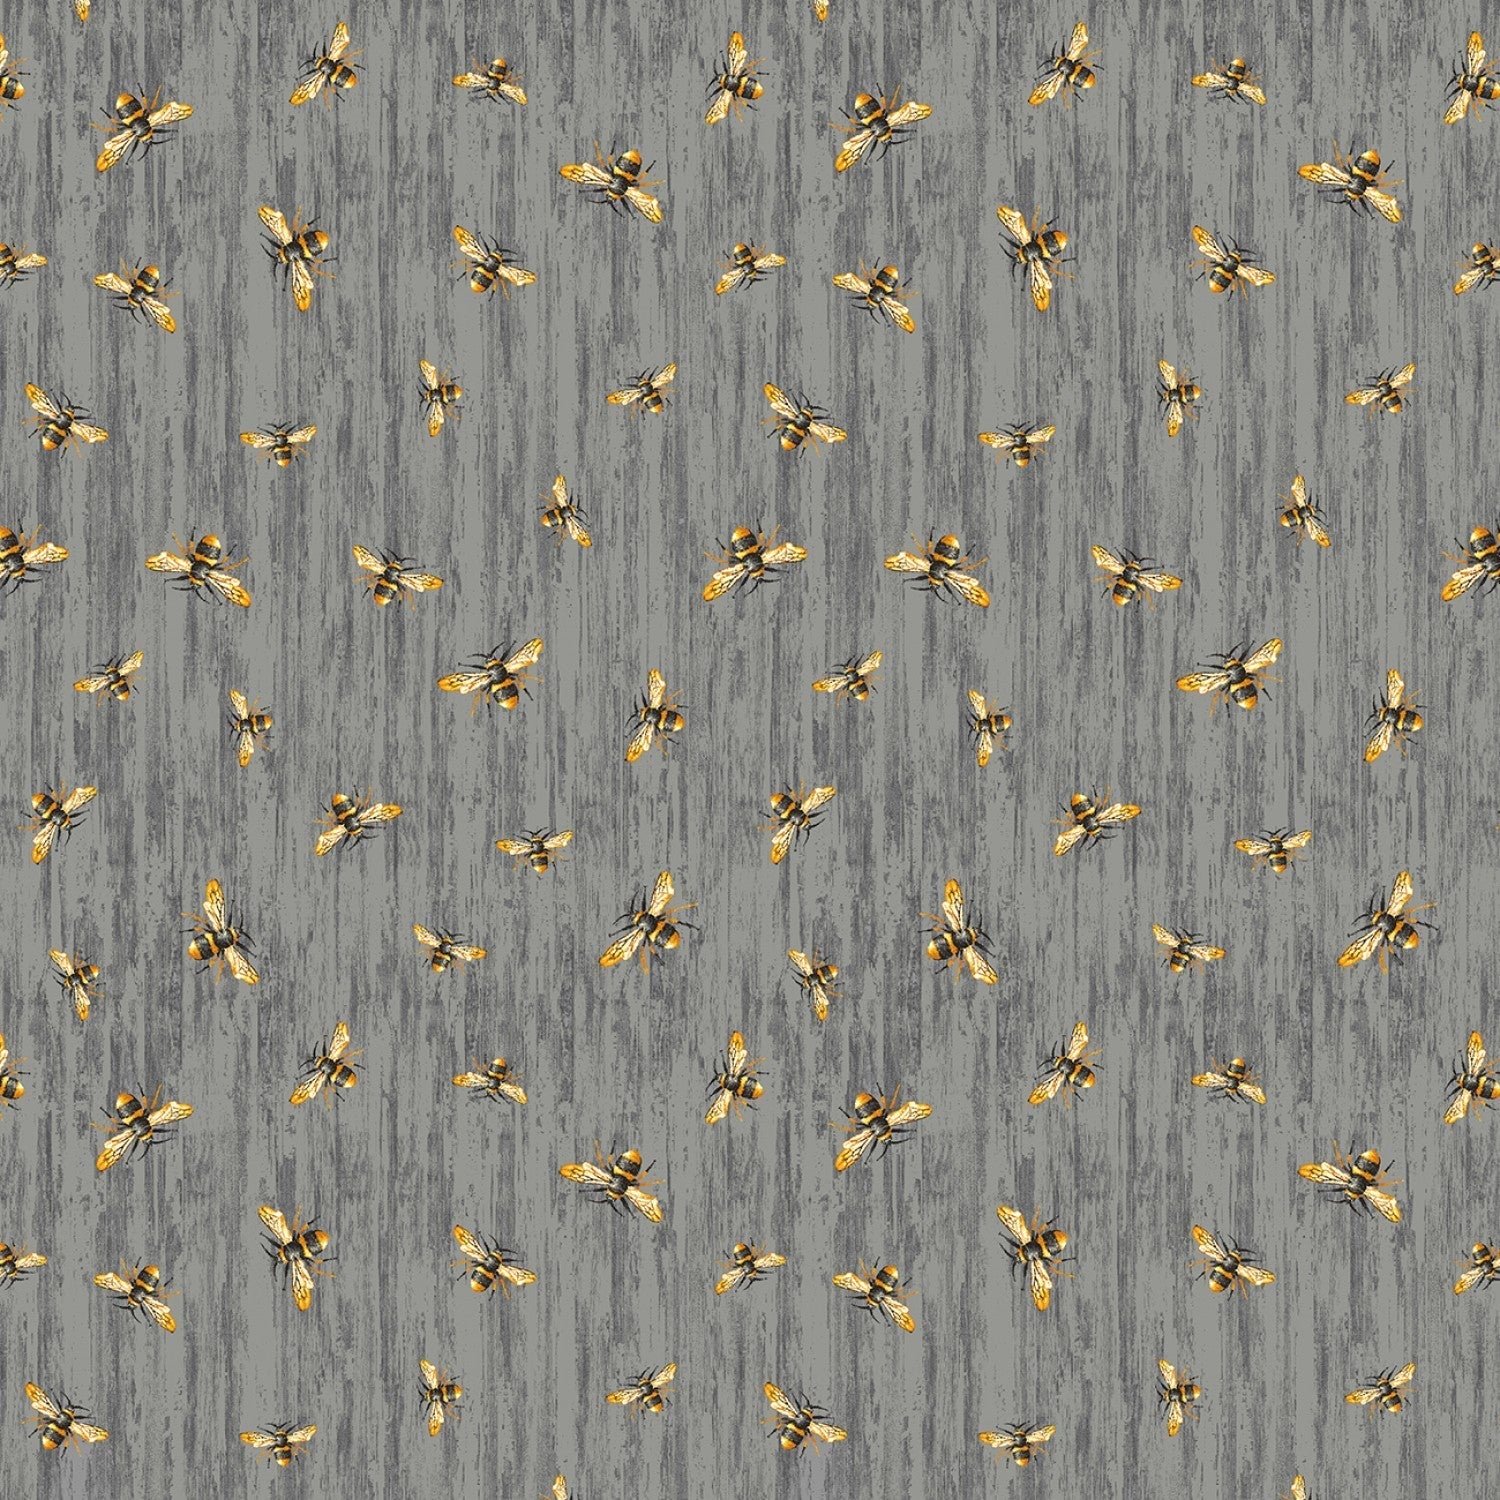 Flying Bees on Wood Texture Cotton Quilting Fabric (slate), Honey Bee Farm